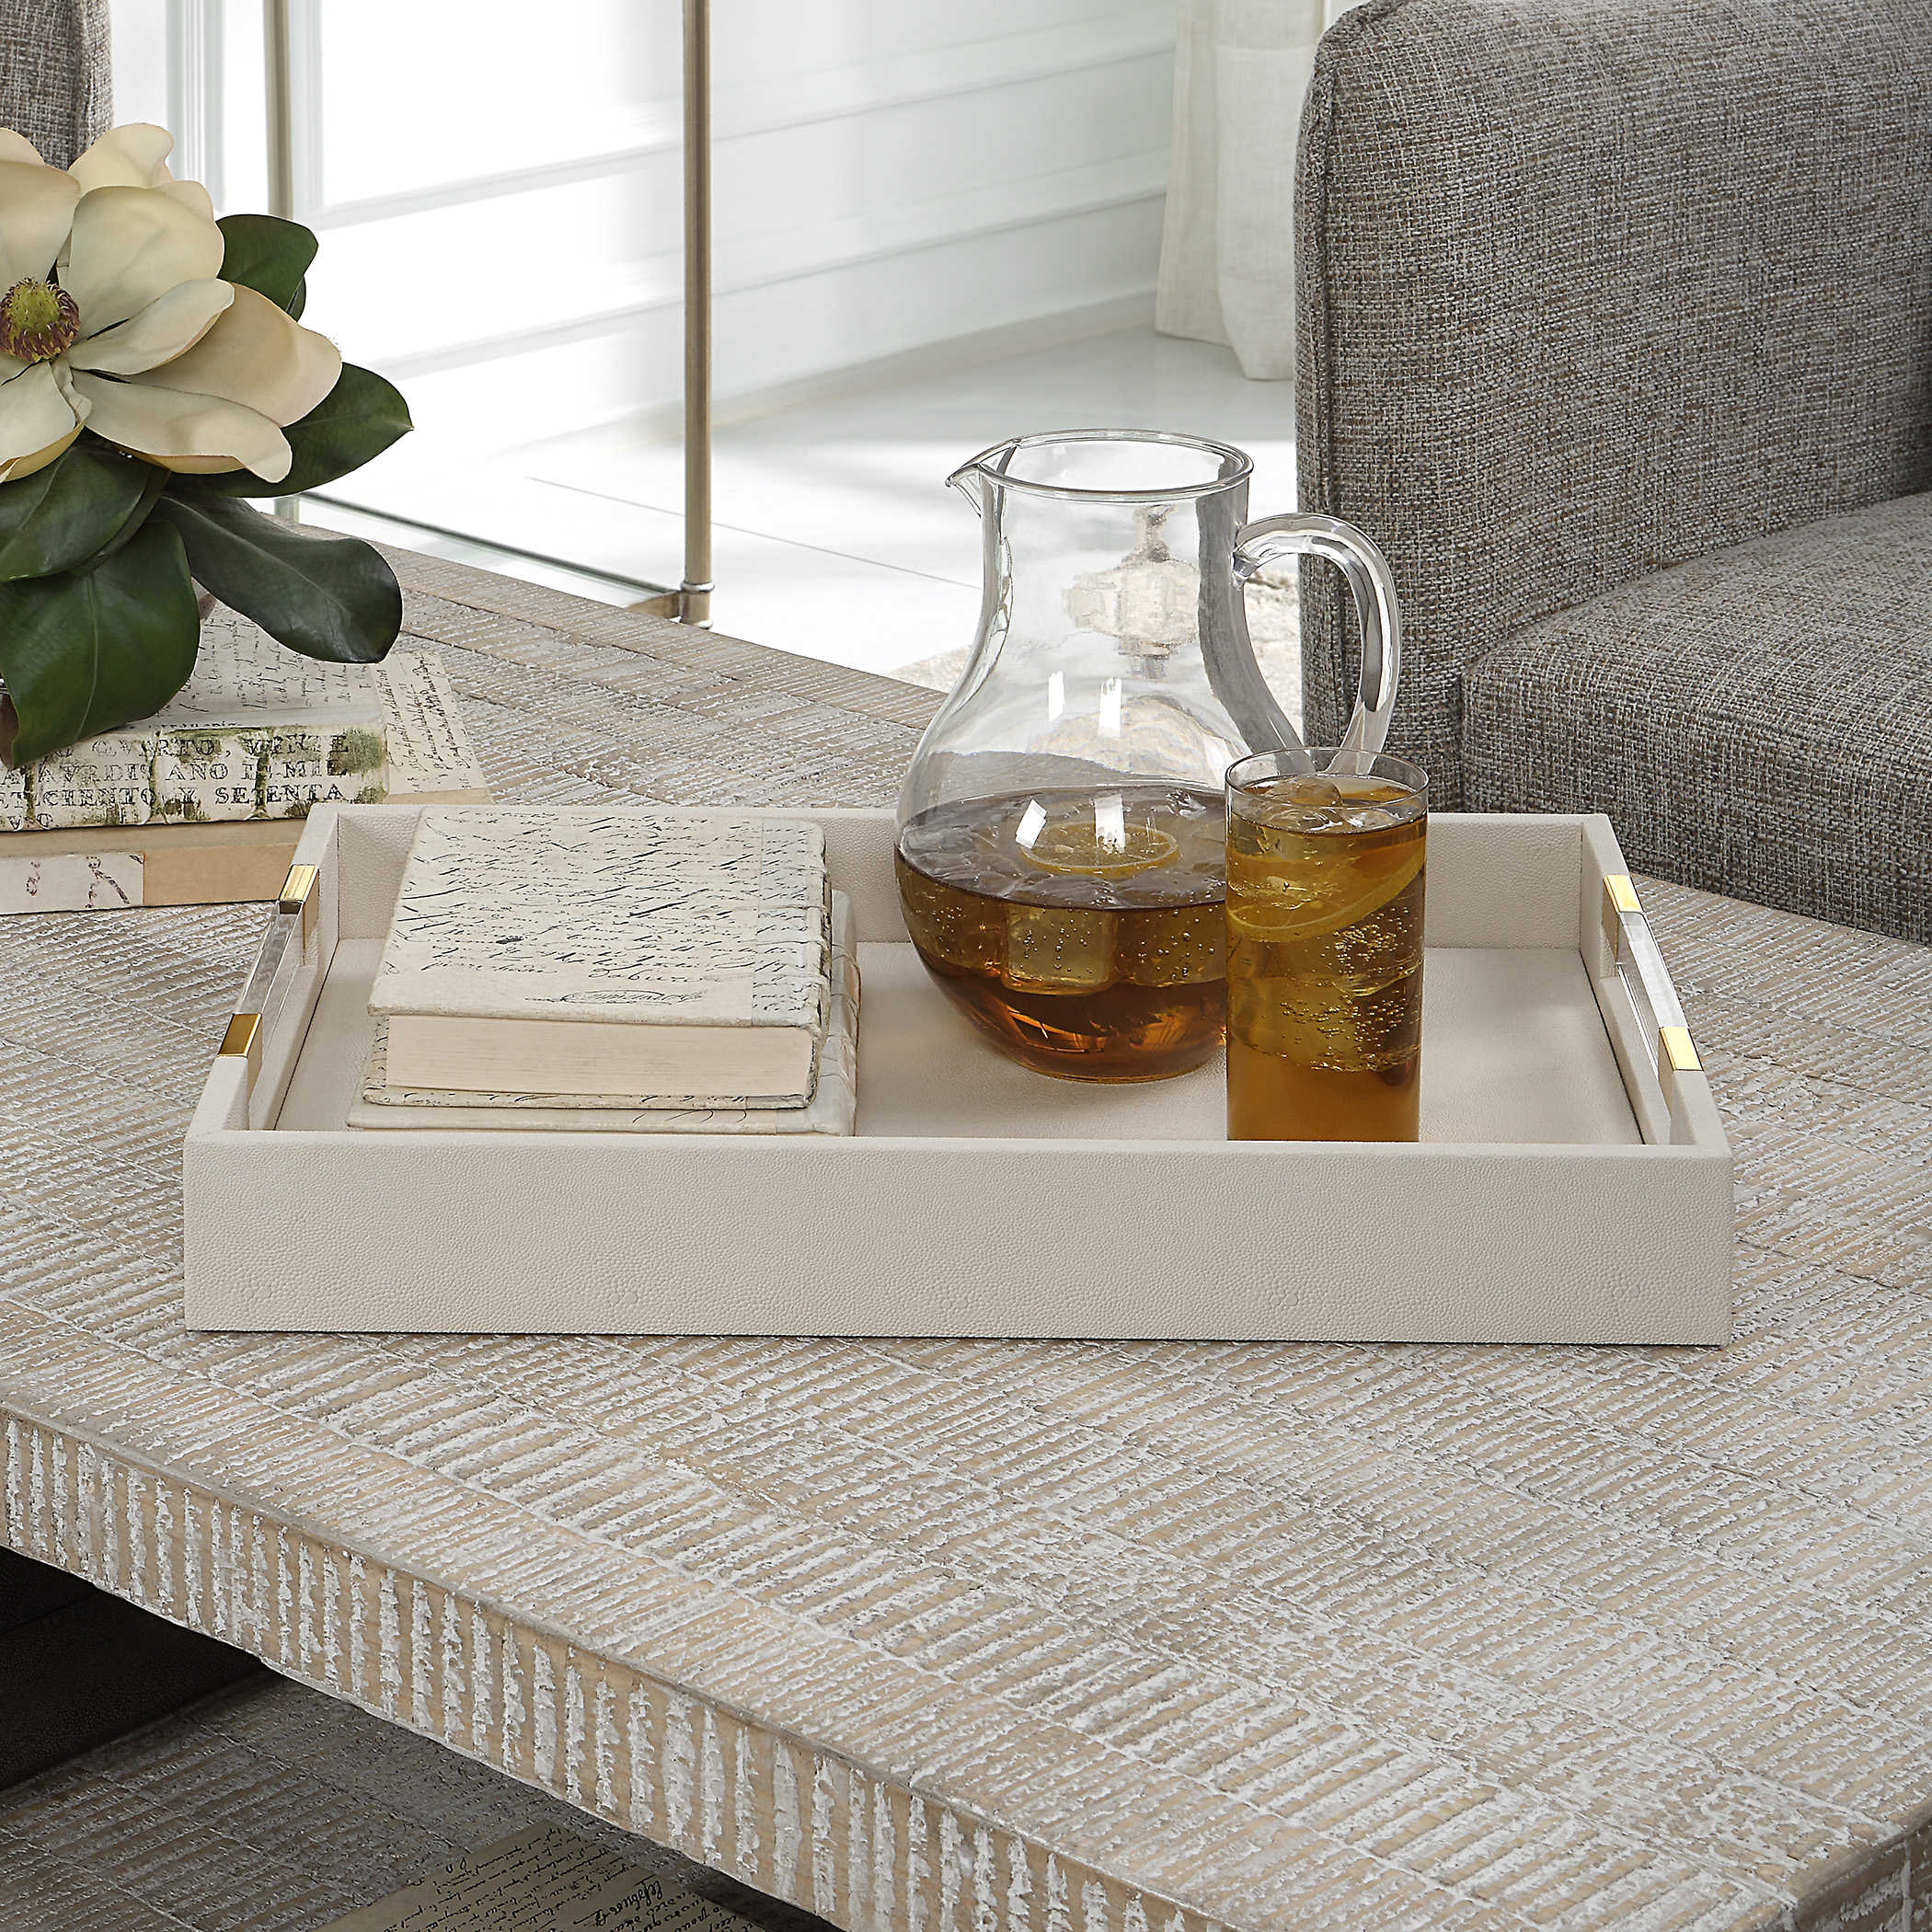 Uttermost Wessex White Shagreen Tray Décor/Home Accent Uttermost   